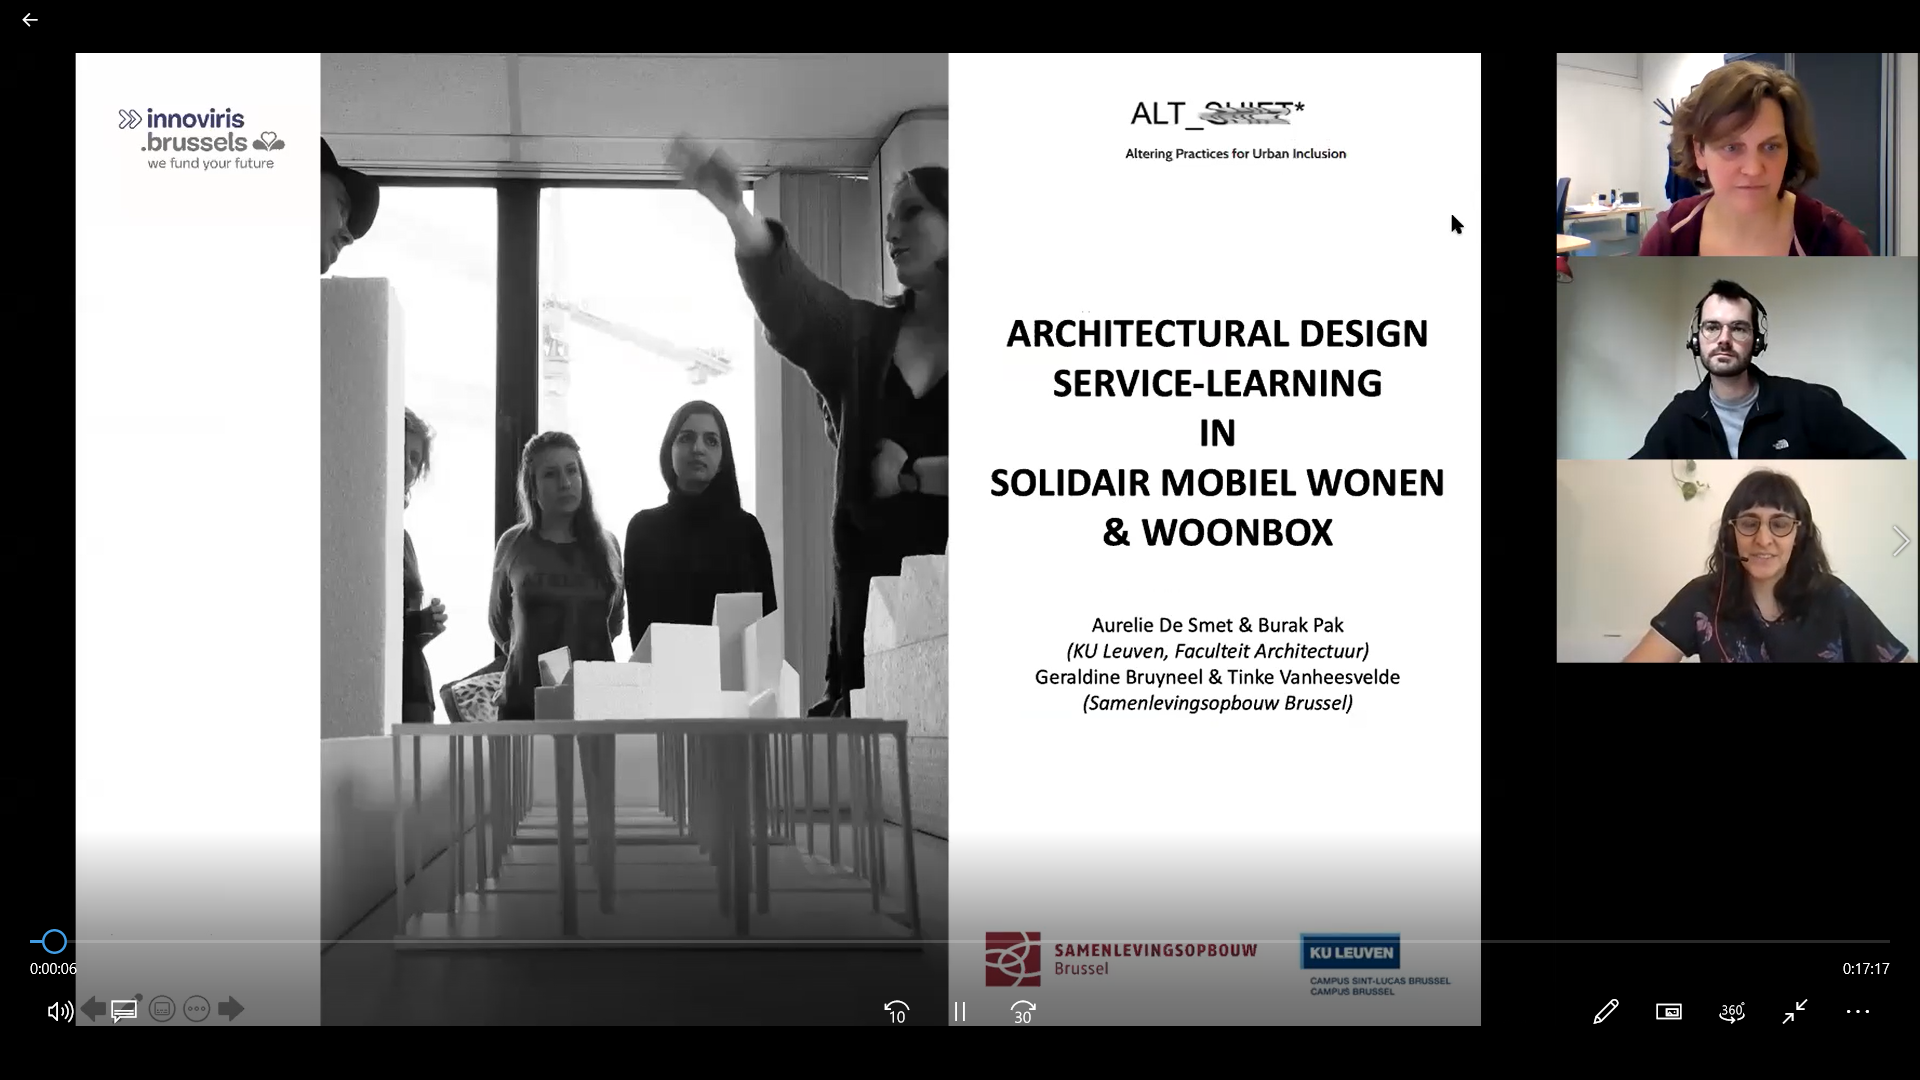 Architectural Design Service-Learning (AD-SL) in ‘Solidair Mobiel Wonen’ en ‘WoonBox’